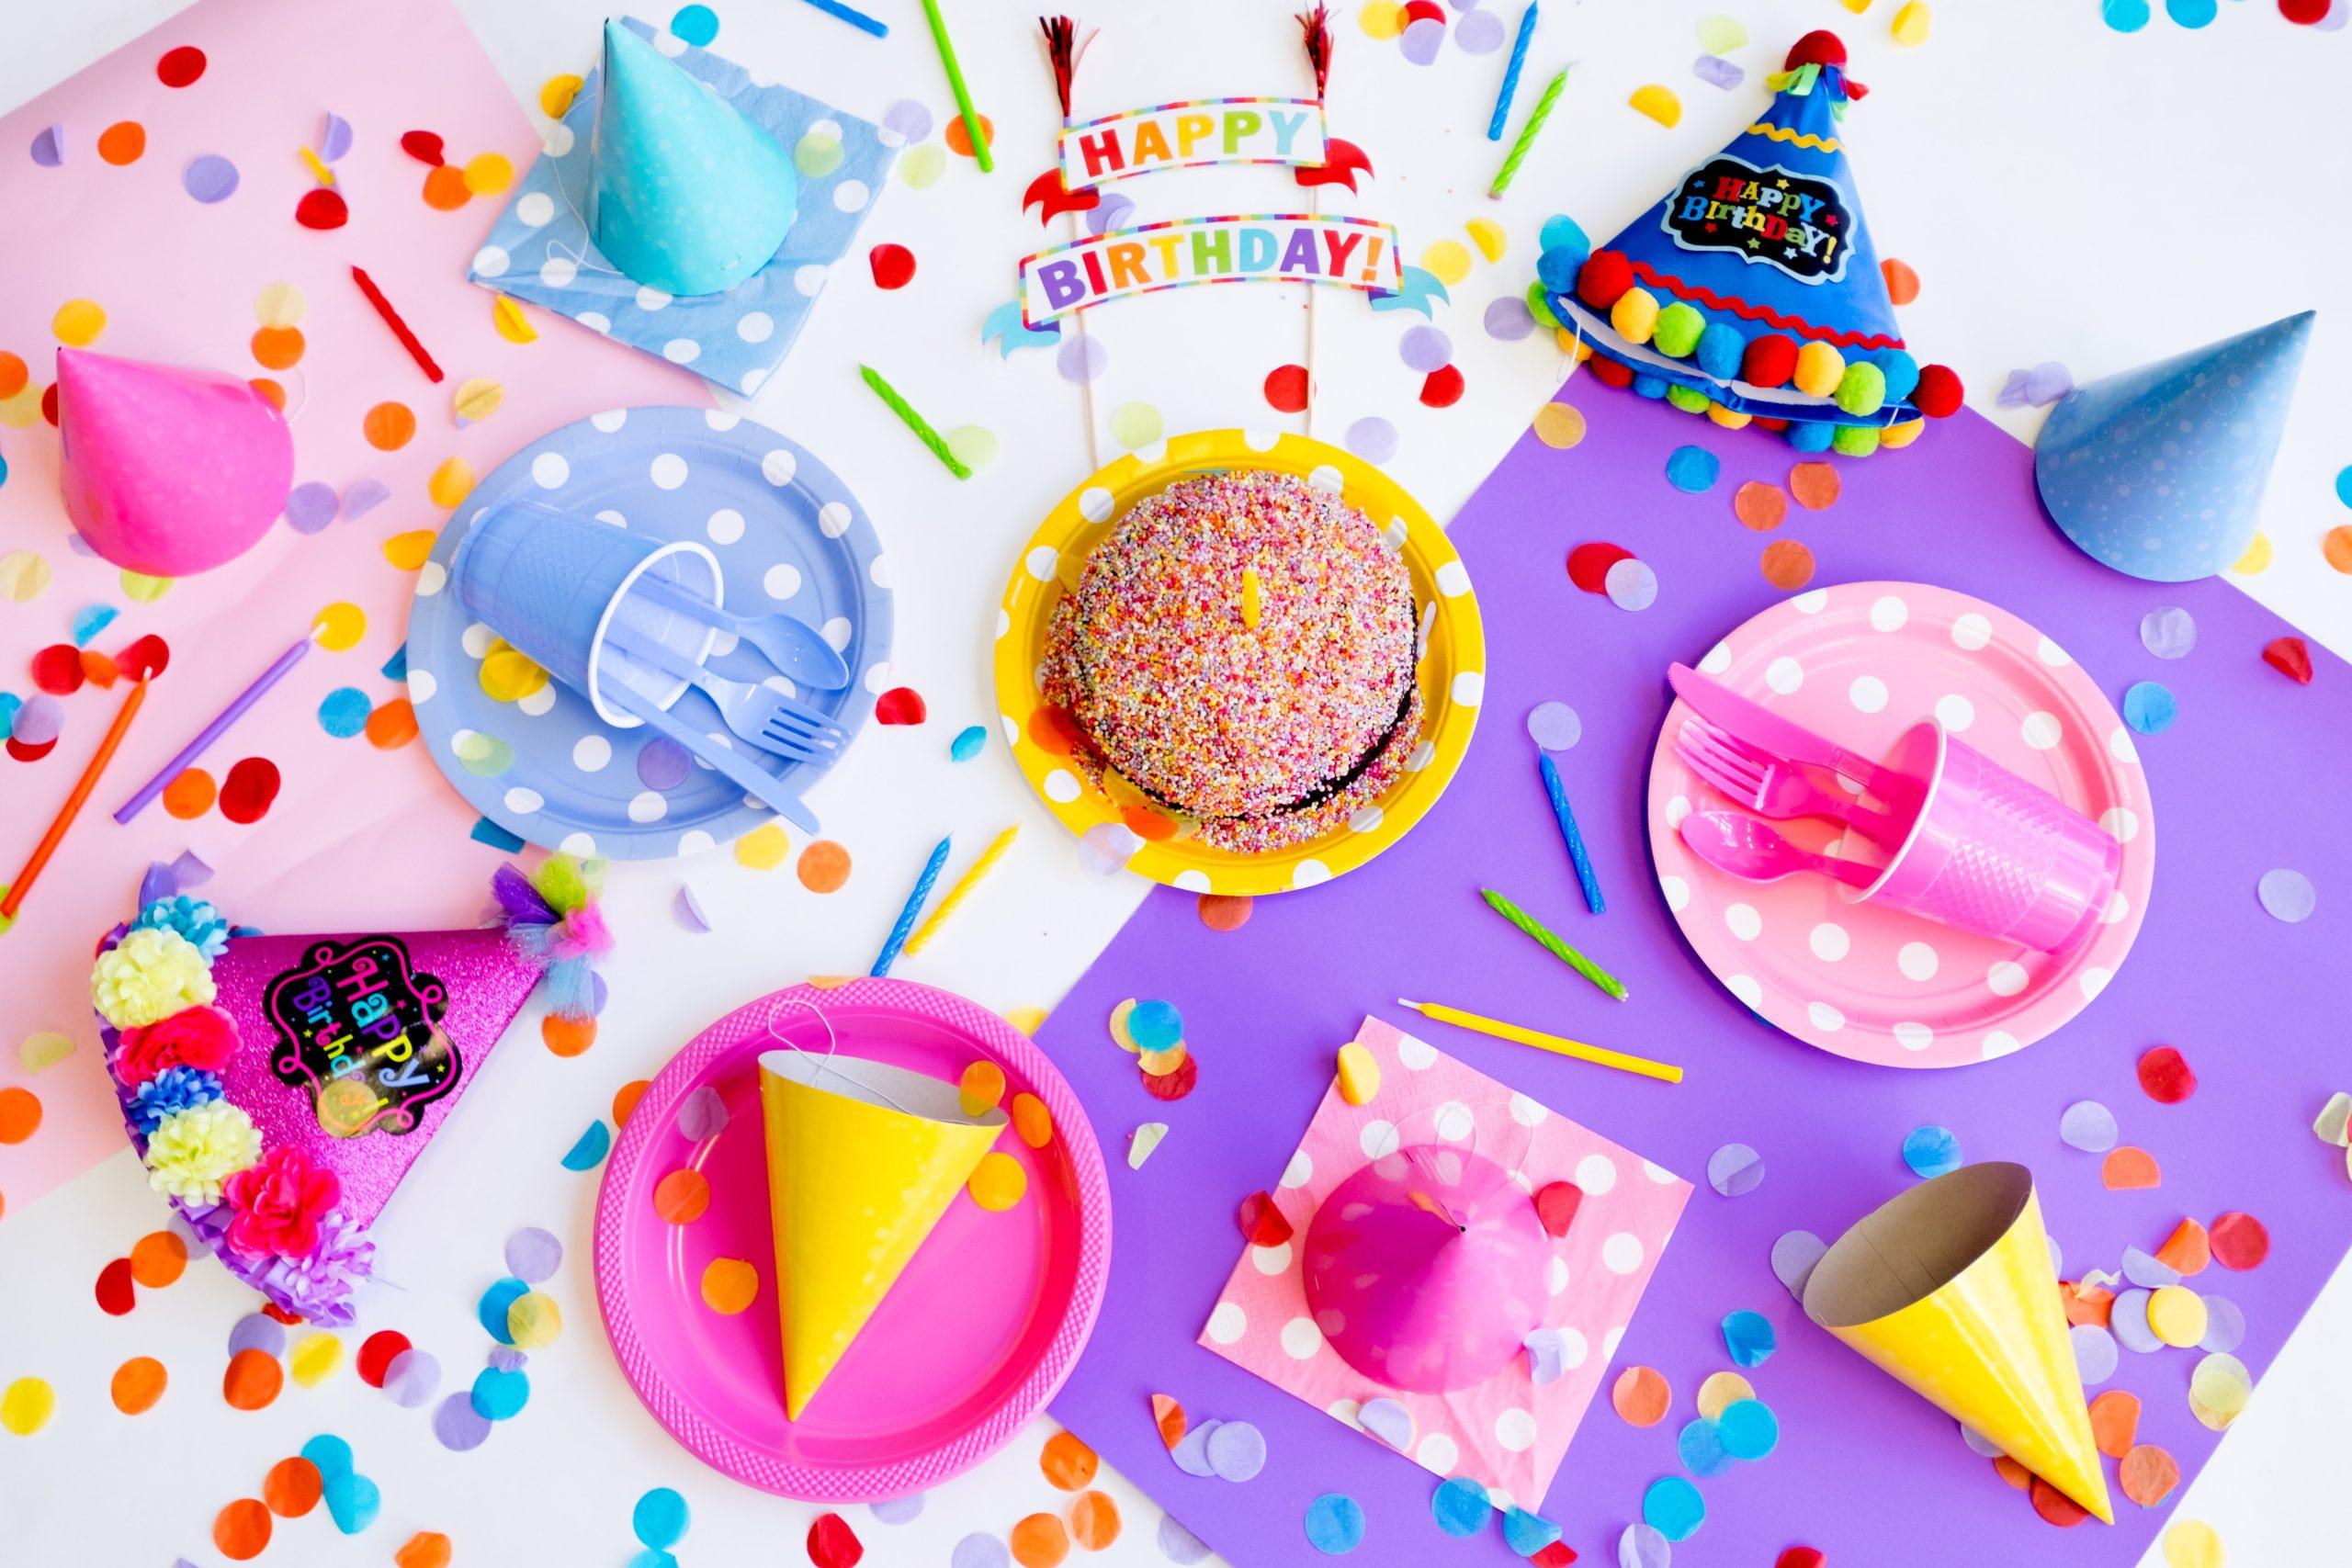 A table with plates, birthday hats, confetti, and cake.